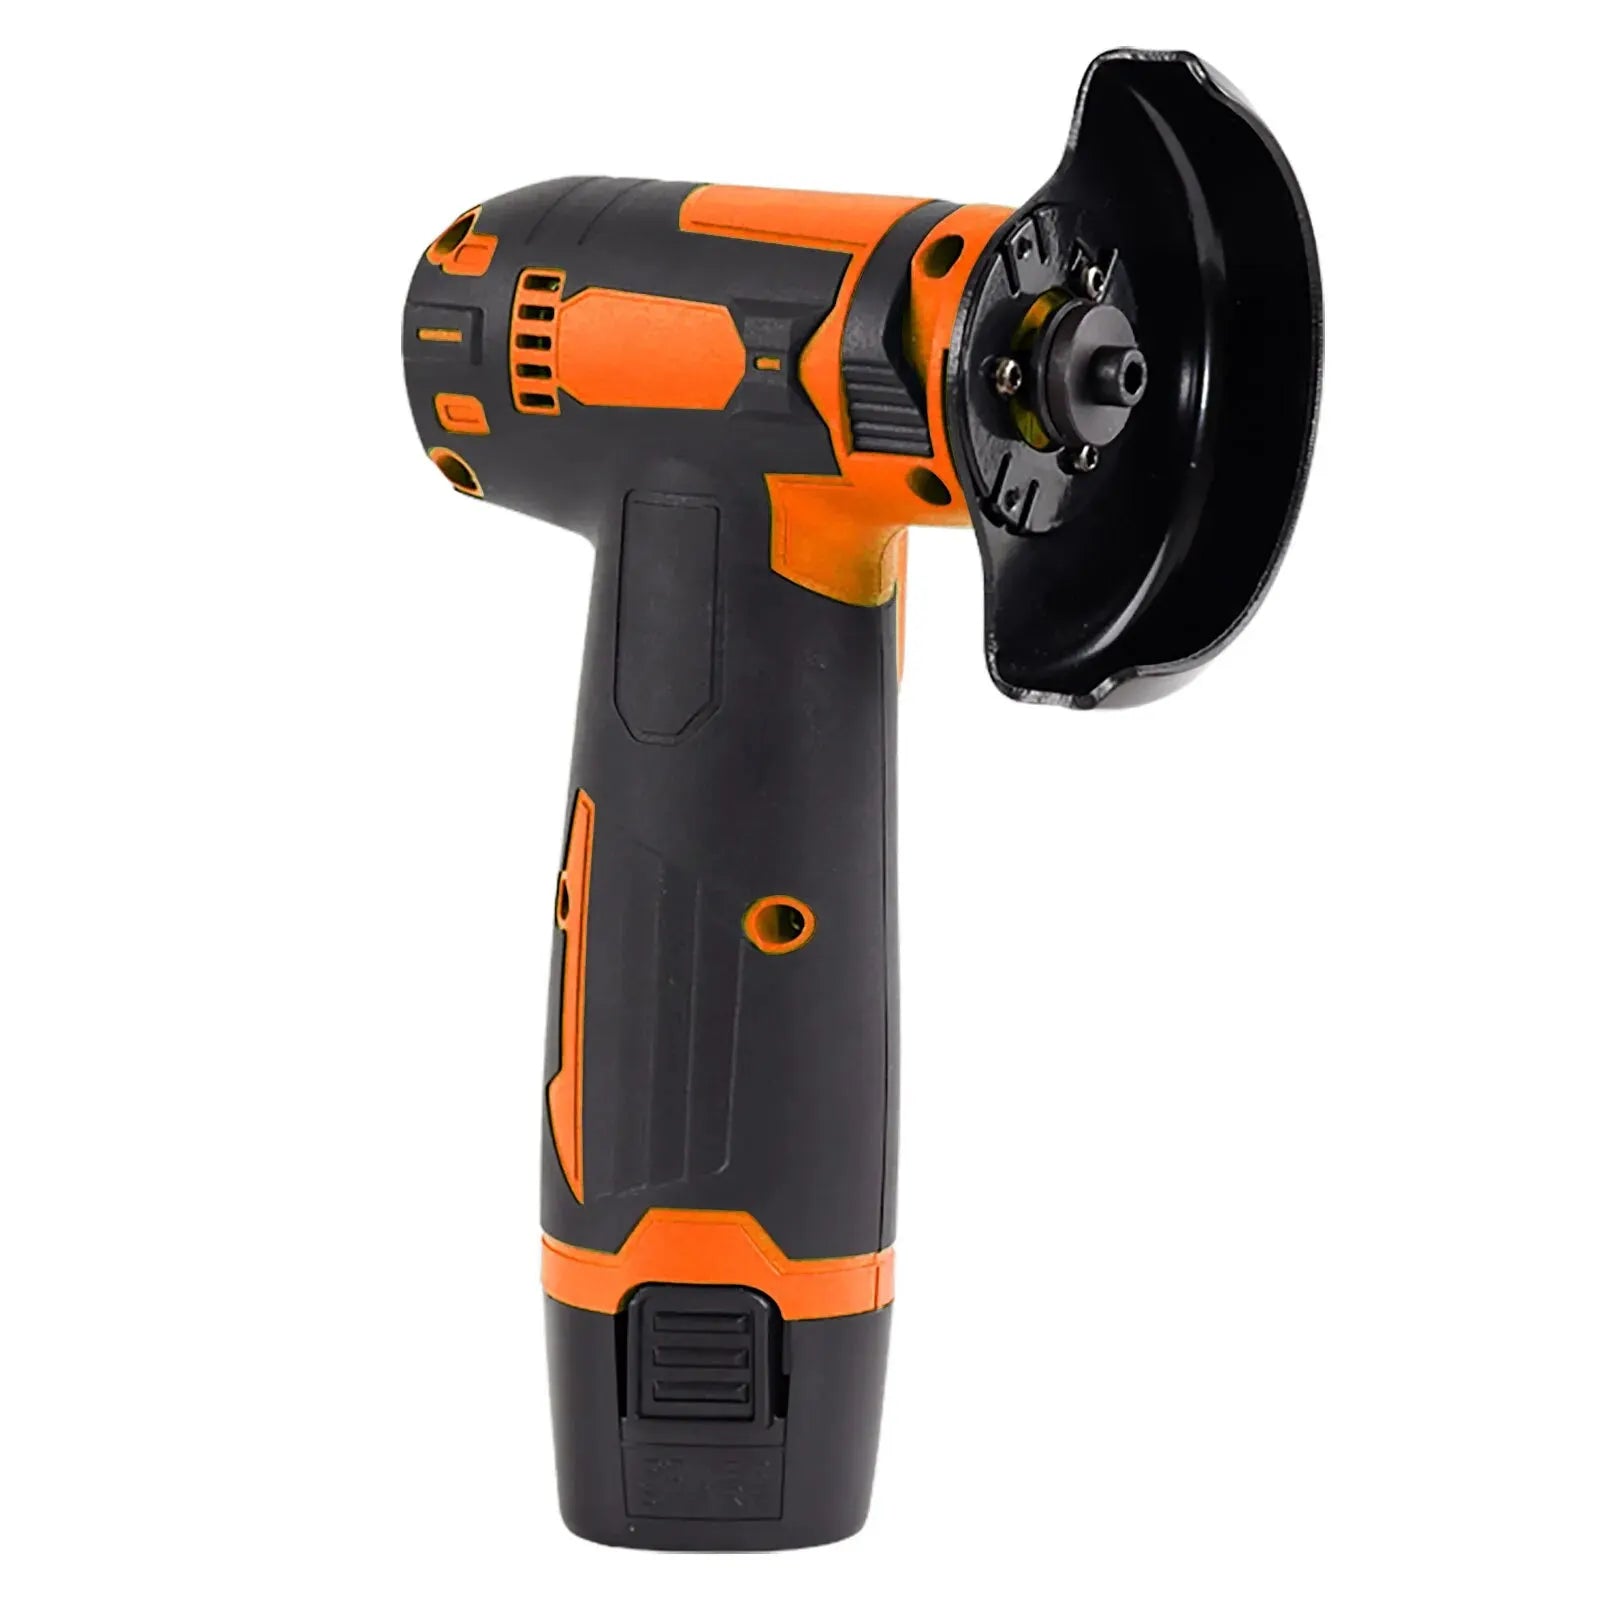 12V Mini Angle Grinder Rechargeable Grinding Tool Polishing Grinding Machine For Cutting Diamond Cordless Power Tools